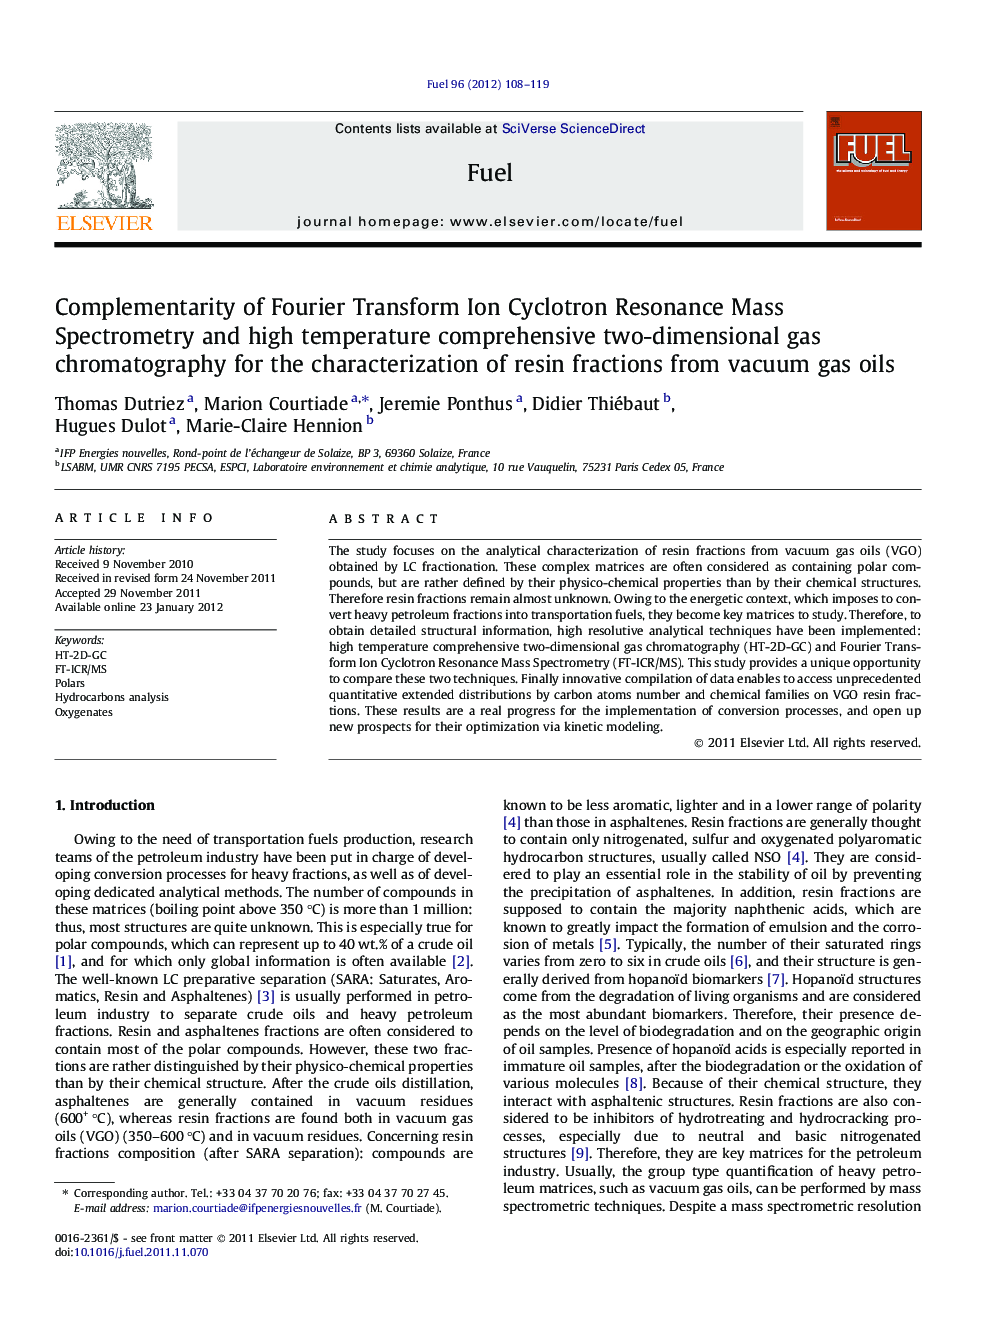 Complementarity of Fourier Transform Ion Cyclotron Resonance Mass Spectrometry and high temperature comprehensive two-dimensional gas chromatography for the characterization of resin fractions from vacuum gas oils